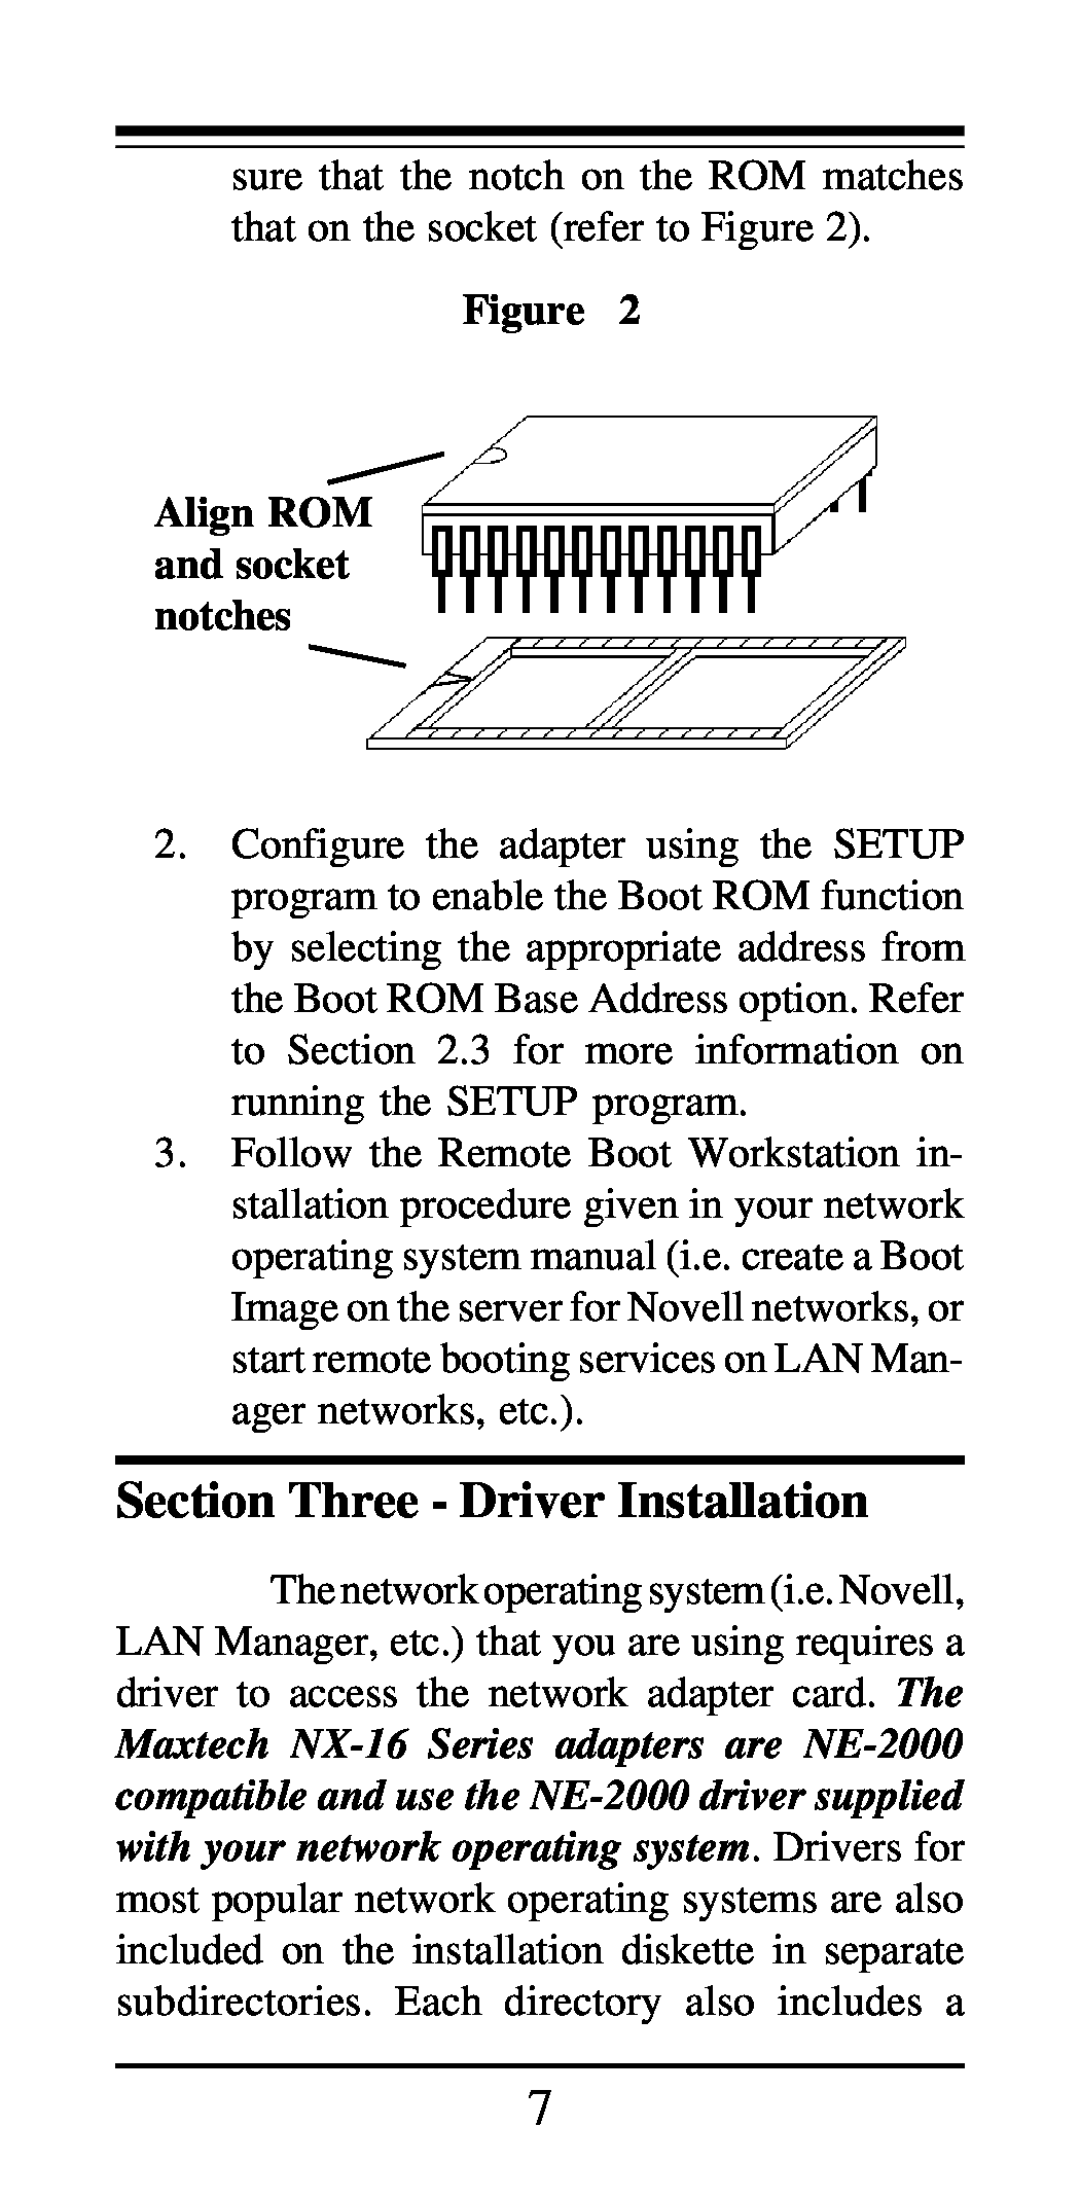 MaxTech NX-16 manual Section Three - Driver Installation, Align ROM and socket notches 